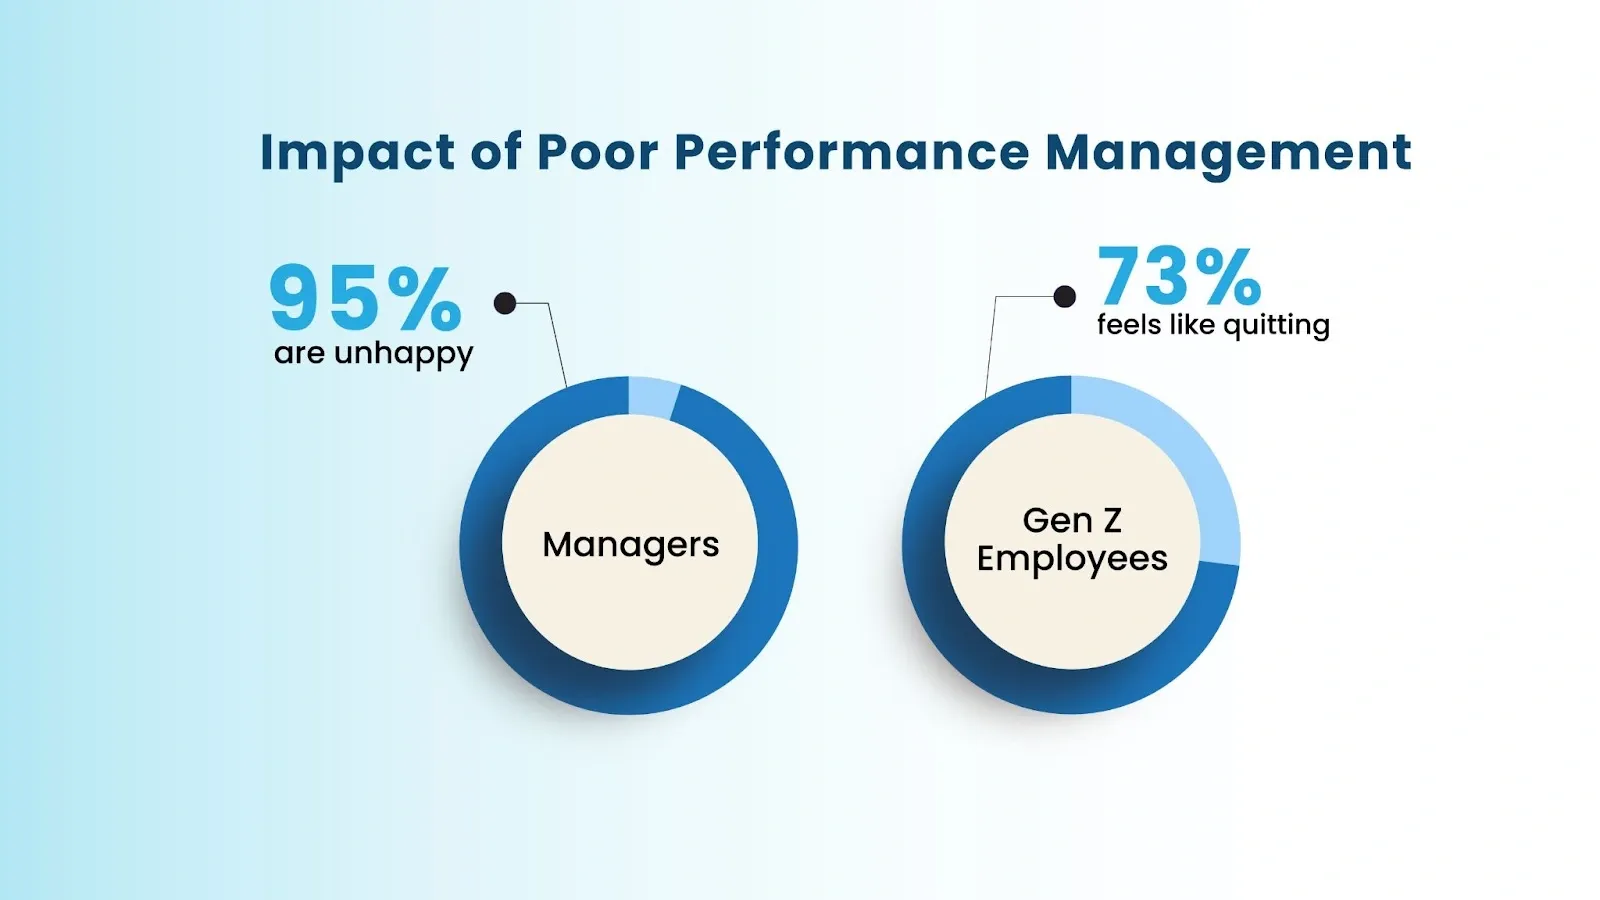 pie chart representing the impact of poor performance management